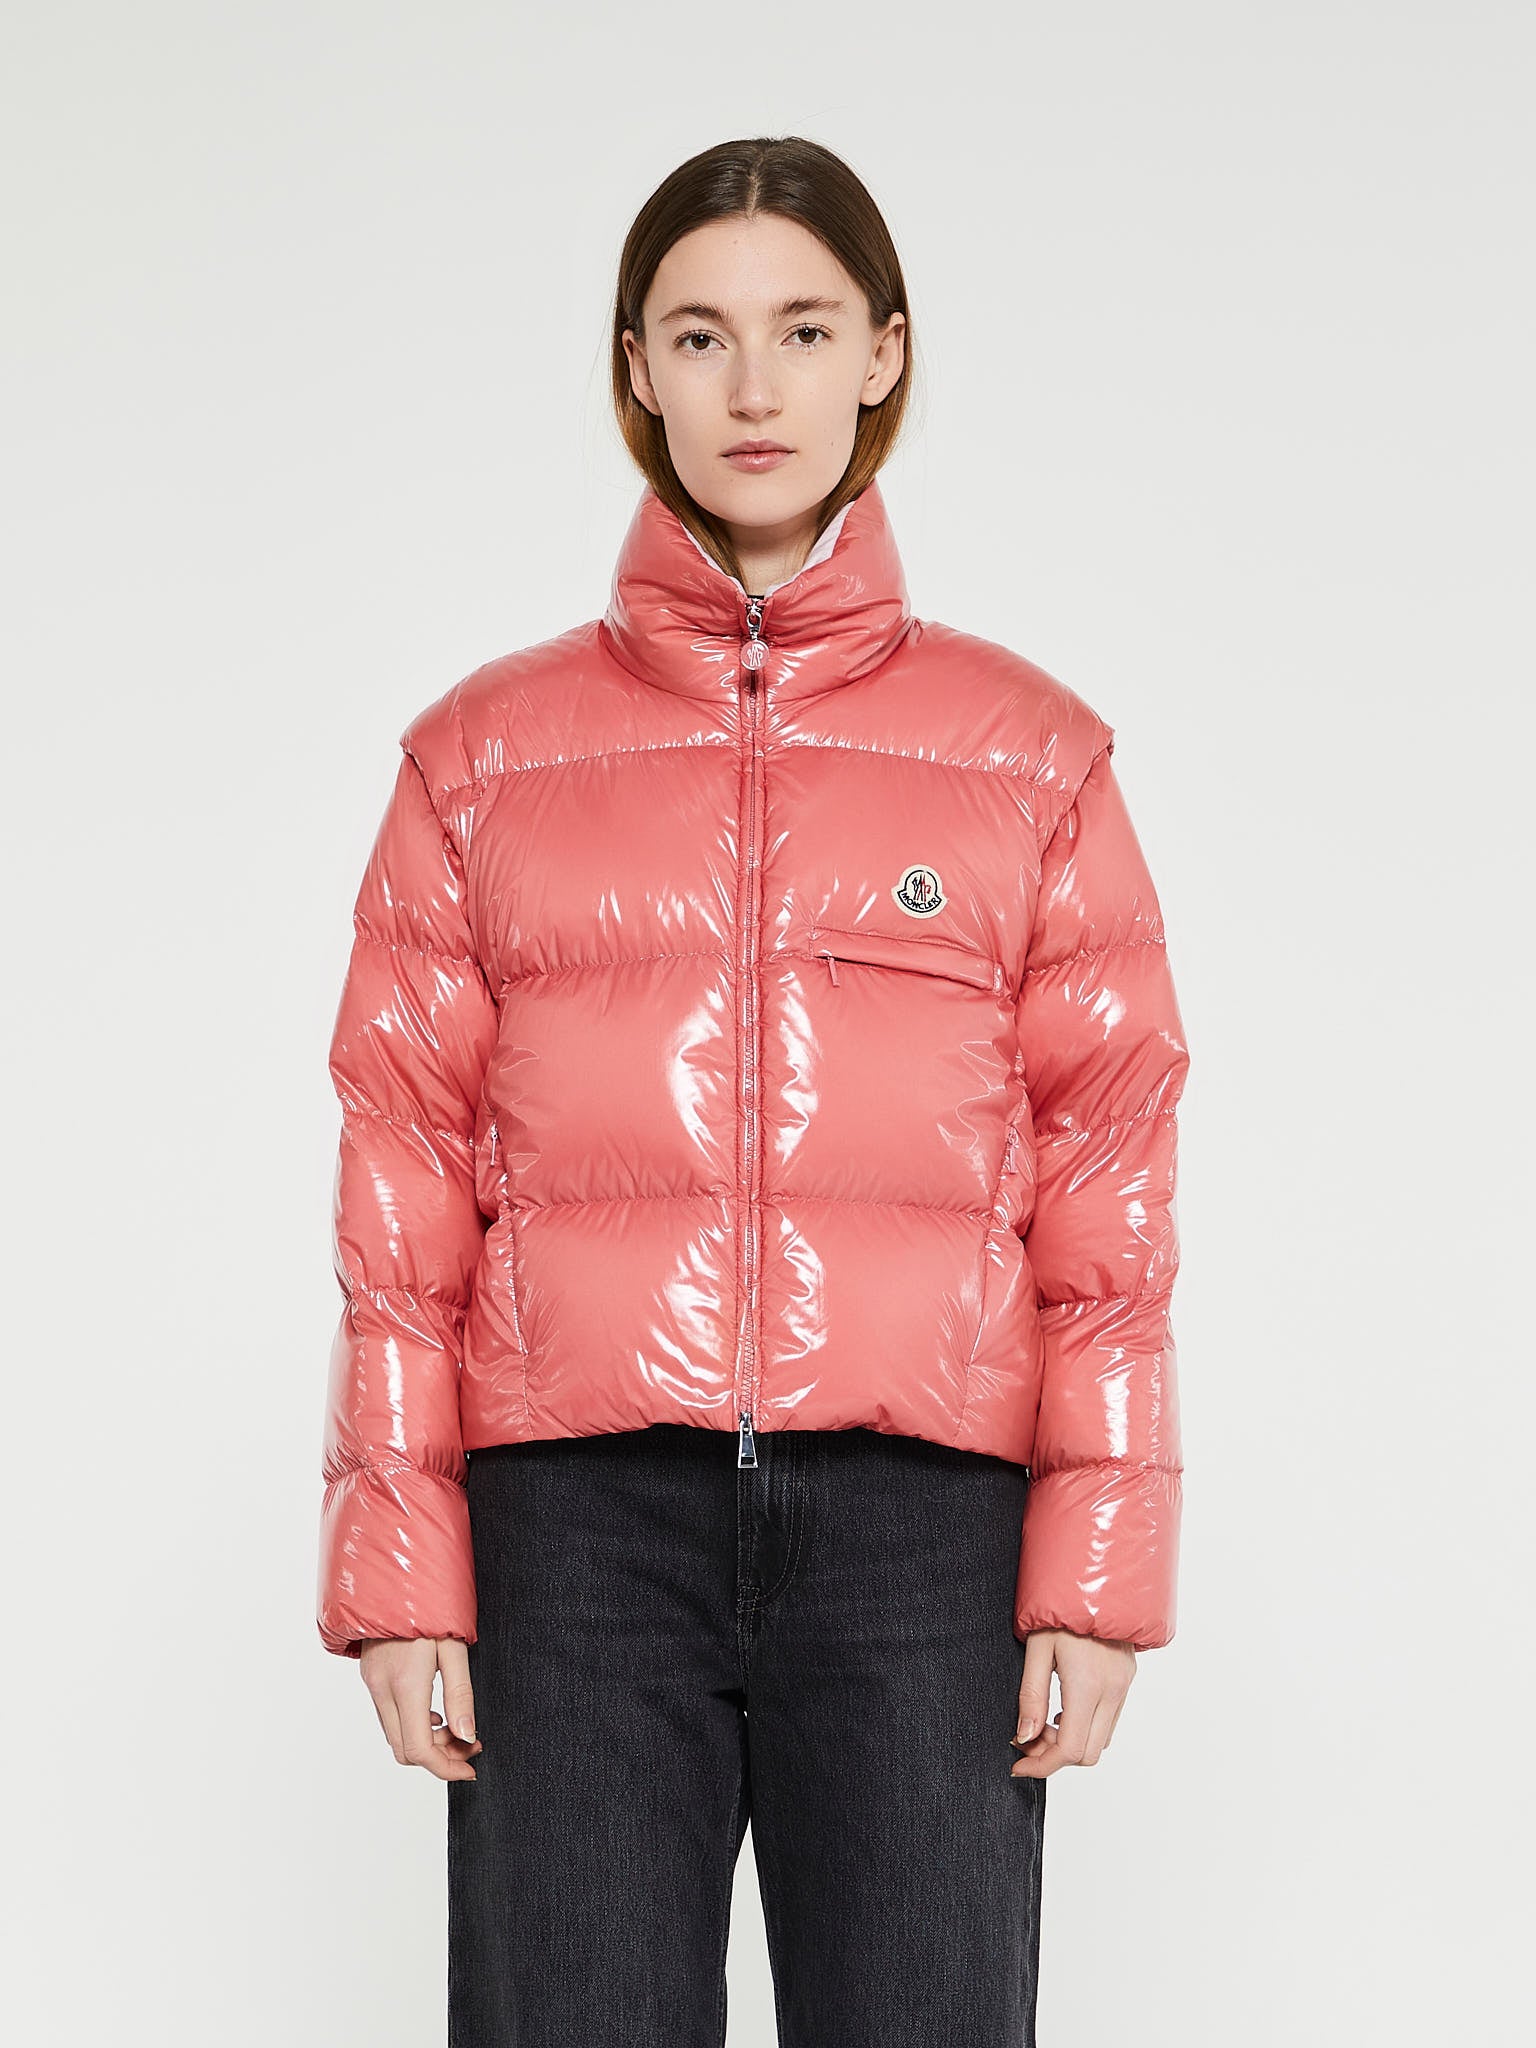 Almo Jacket in Rose